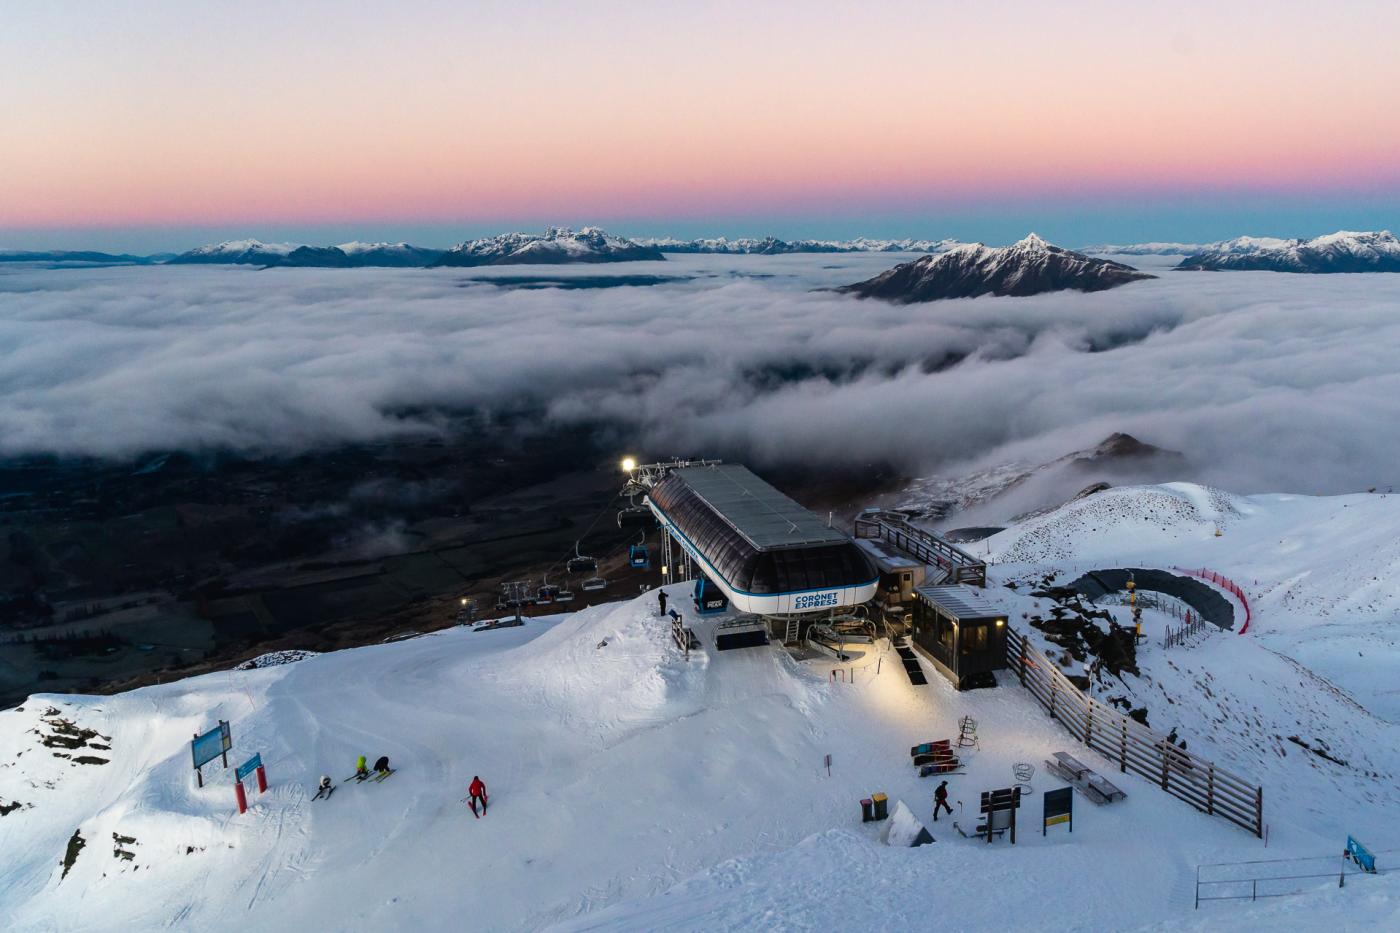 Soft warm hues of the sunrise at Coronet Peak with mountain poking out above clouds